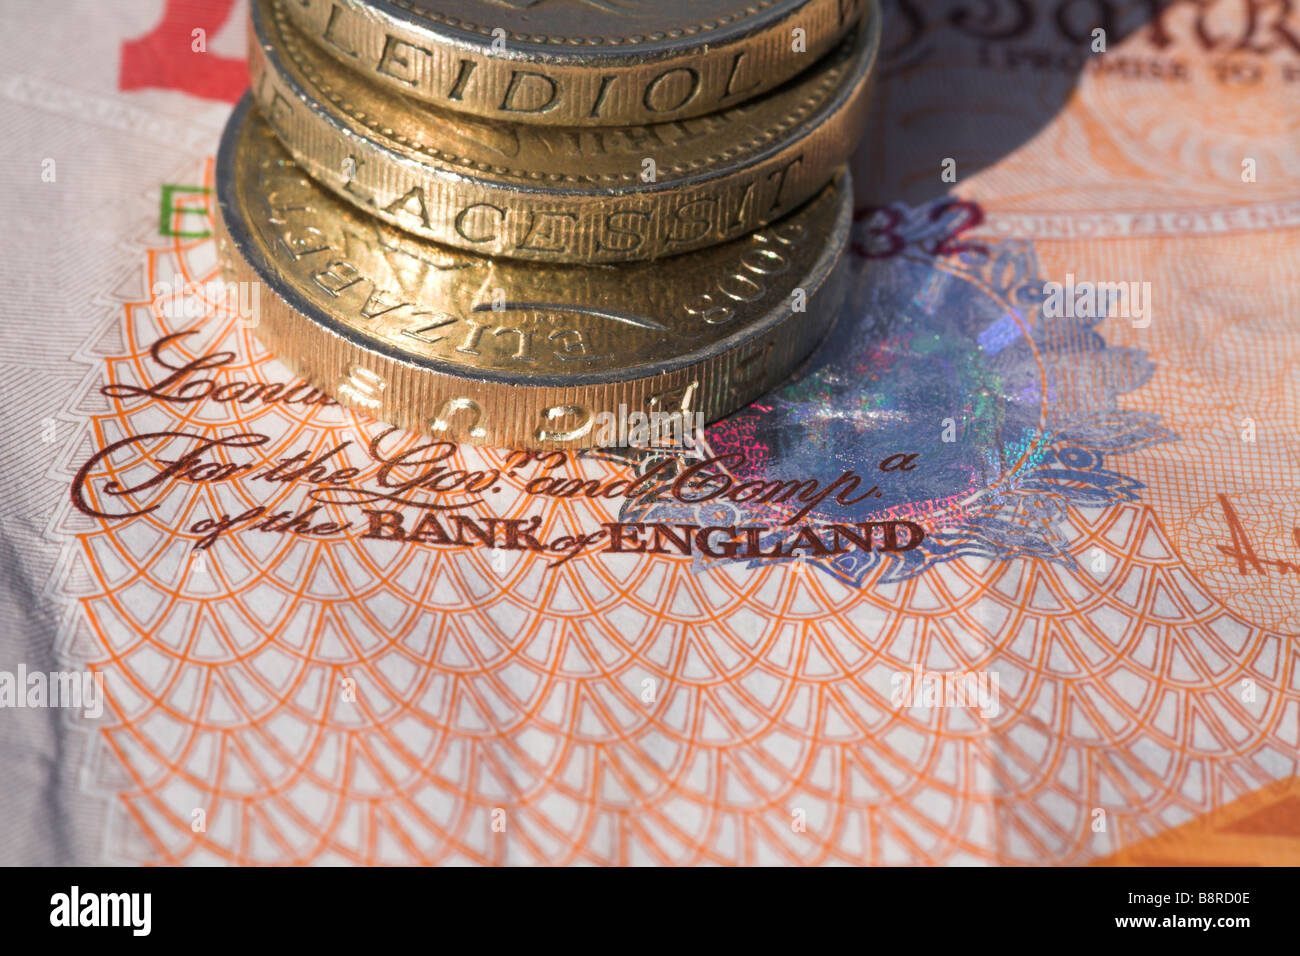 Bank of England banknote with pile of pound coins. Stock Photo